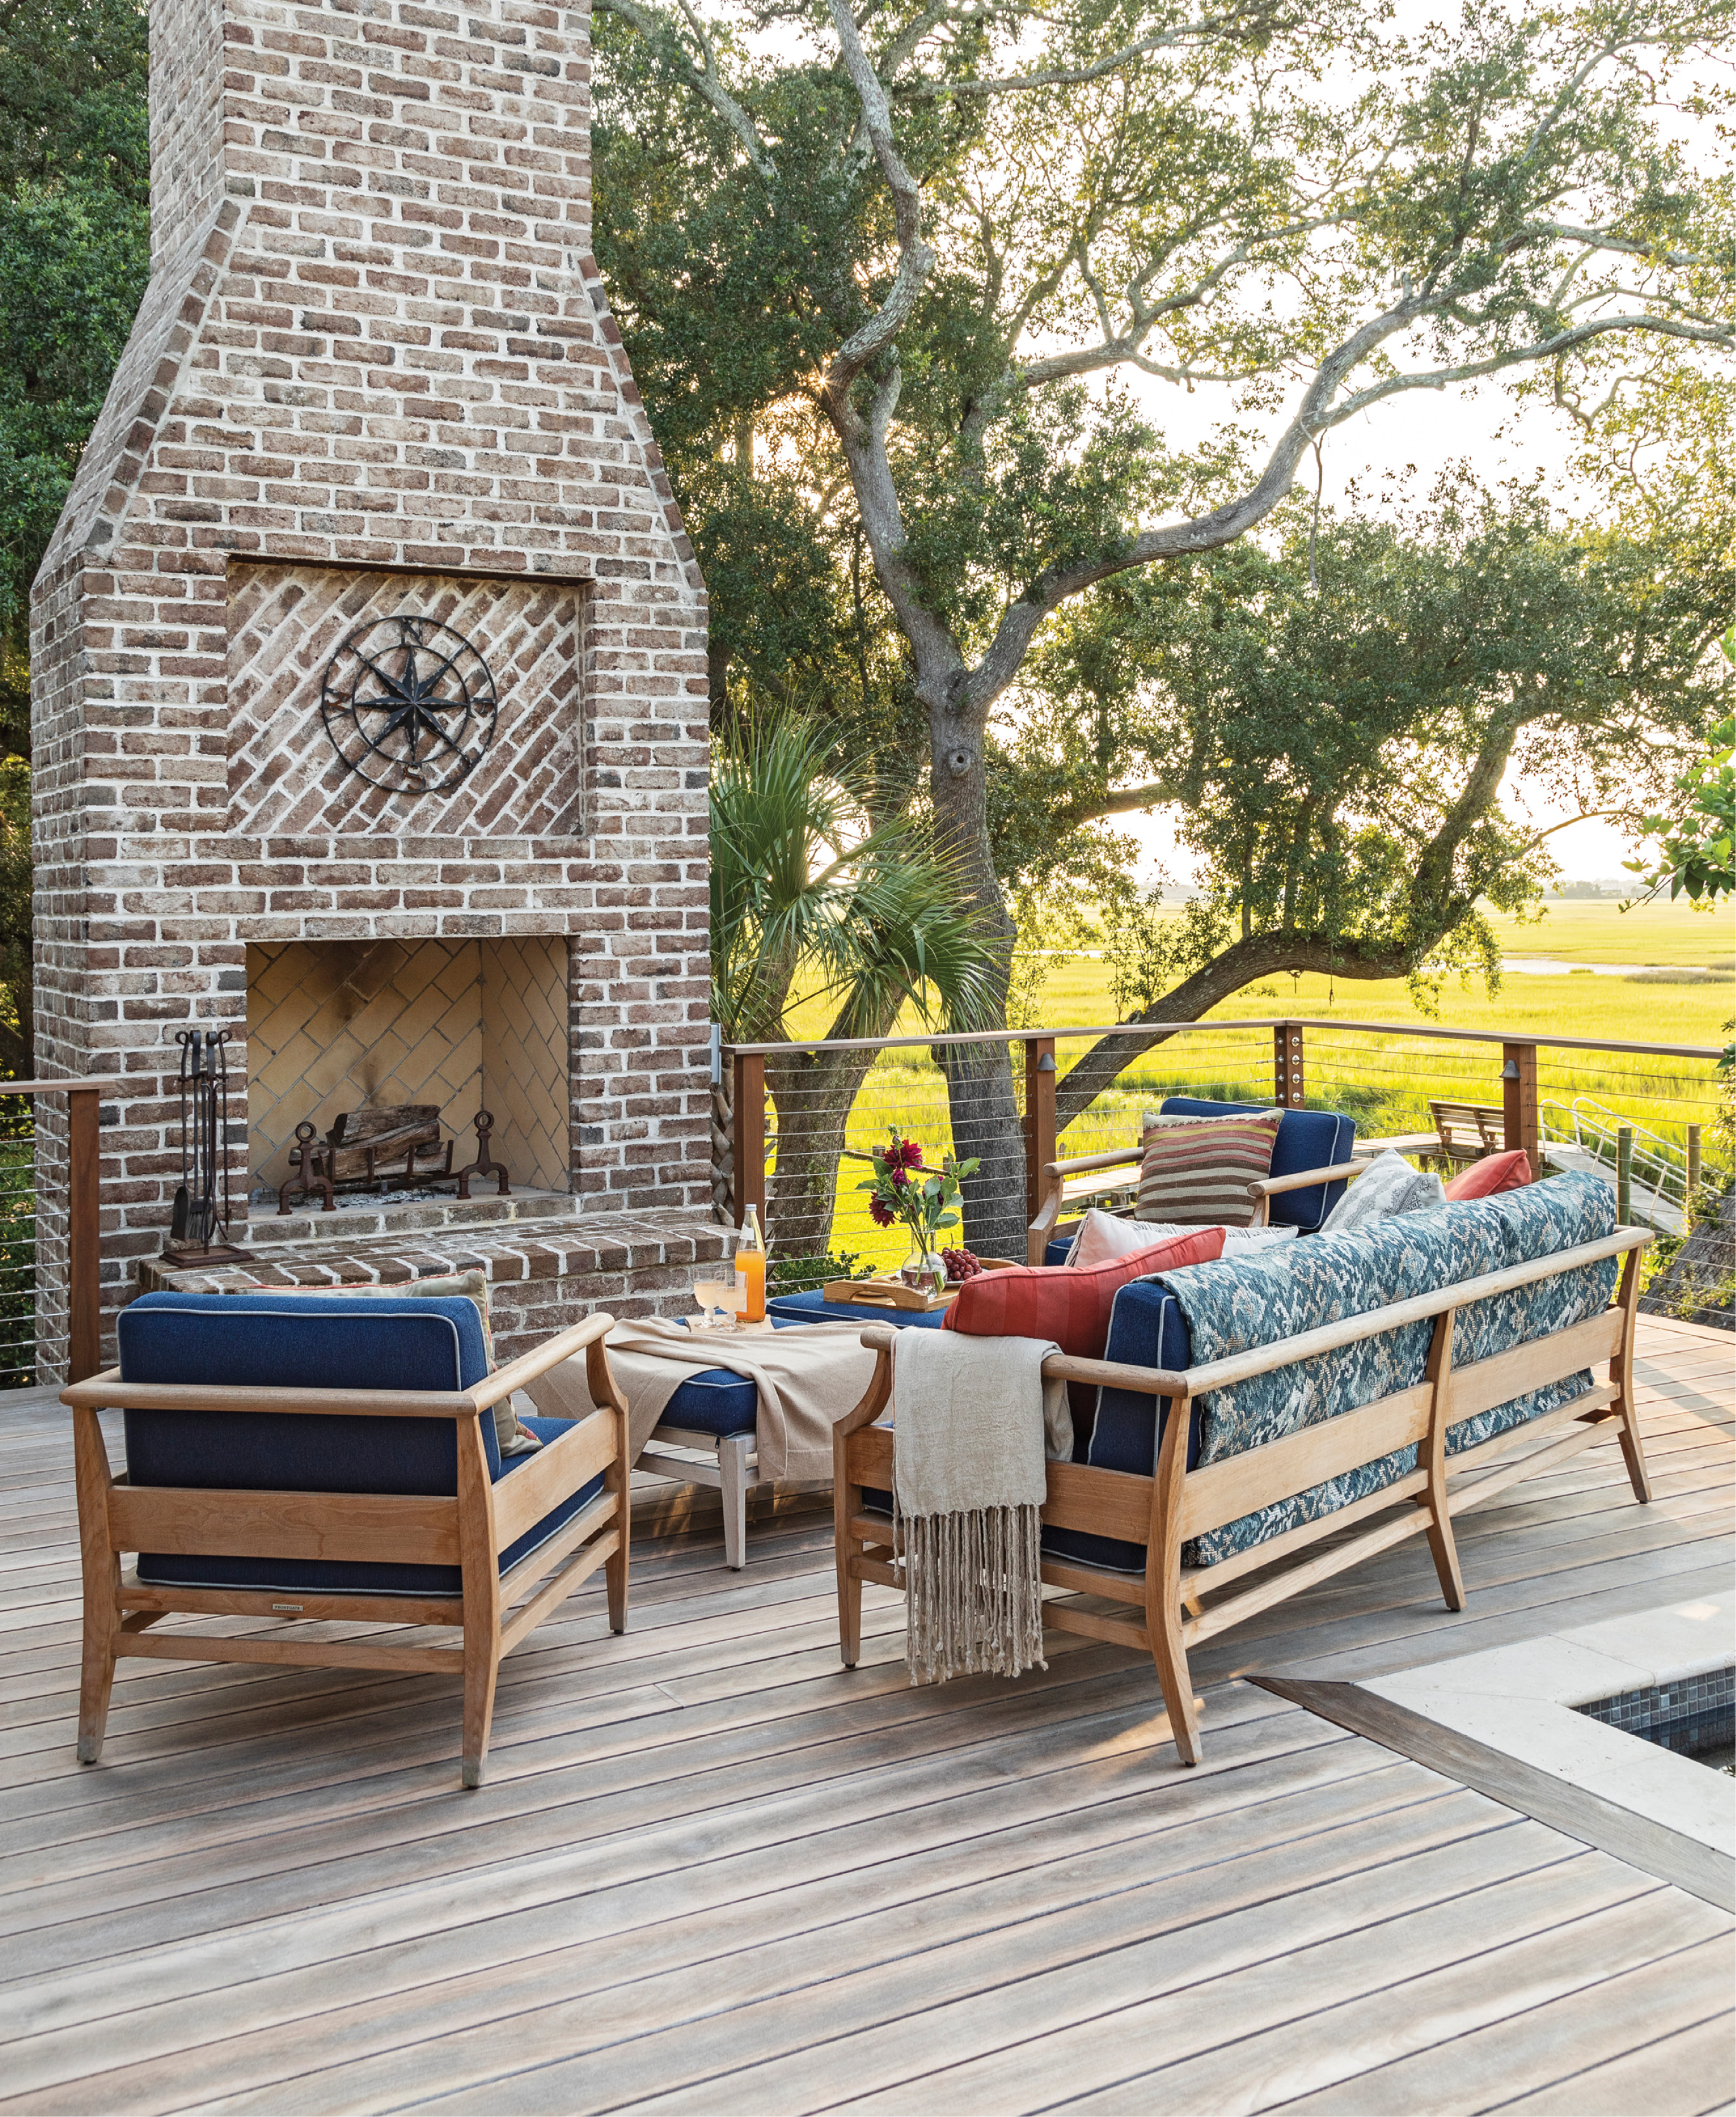 LOWCOUNTRY OASIS: A love of sailing, the Holy City, and outdoor living brought a Chicago couple back to James Island to build their forever home on an idyllic marsh-front lot.